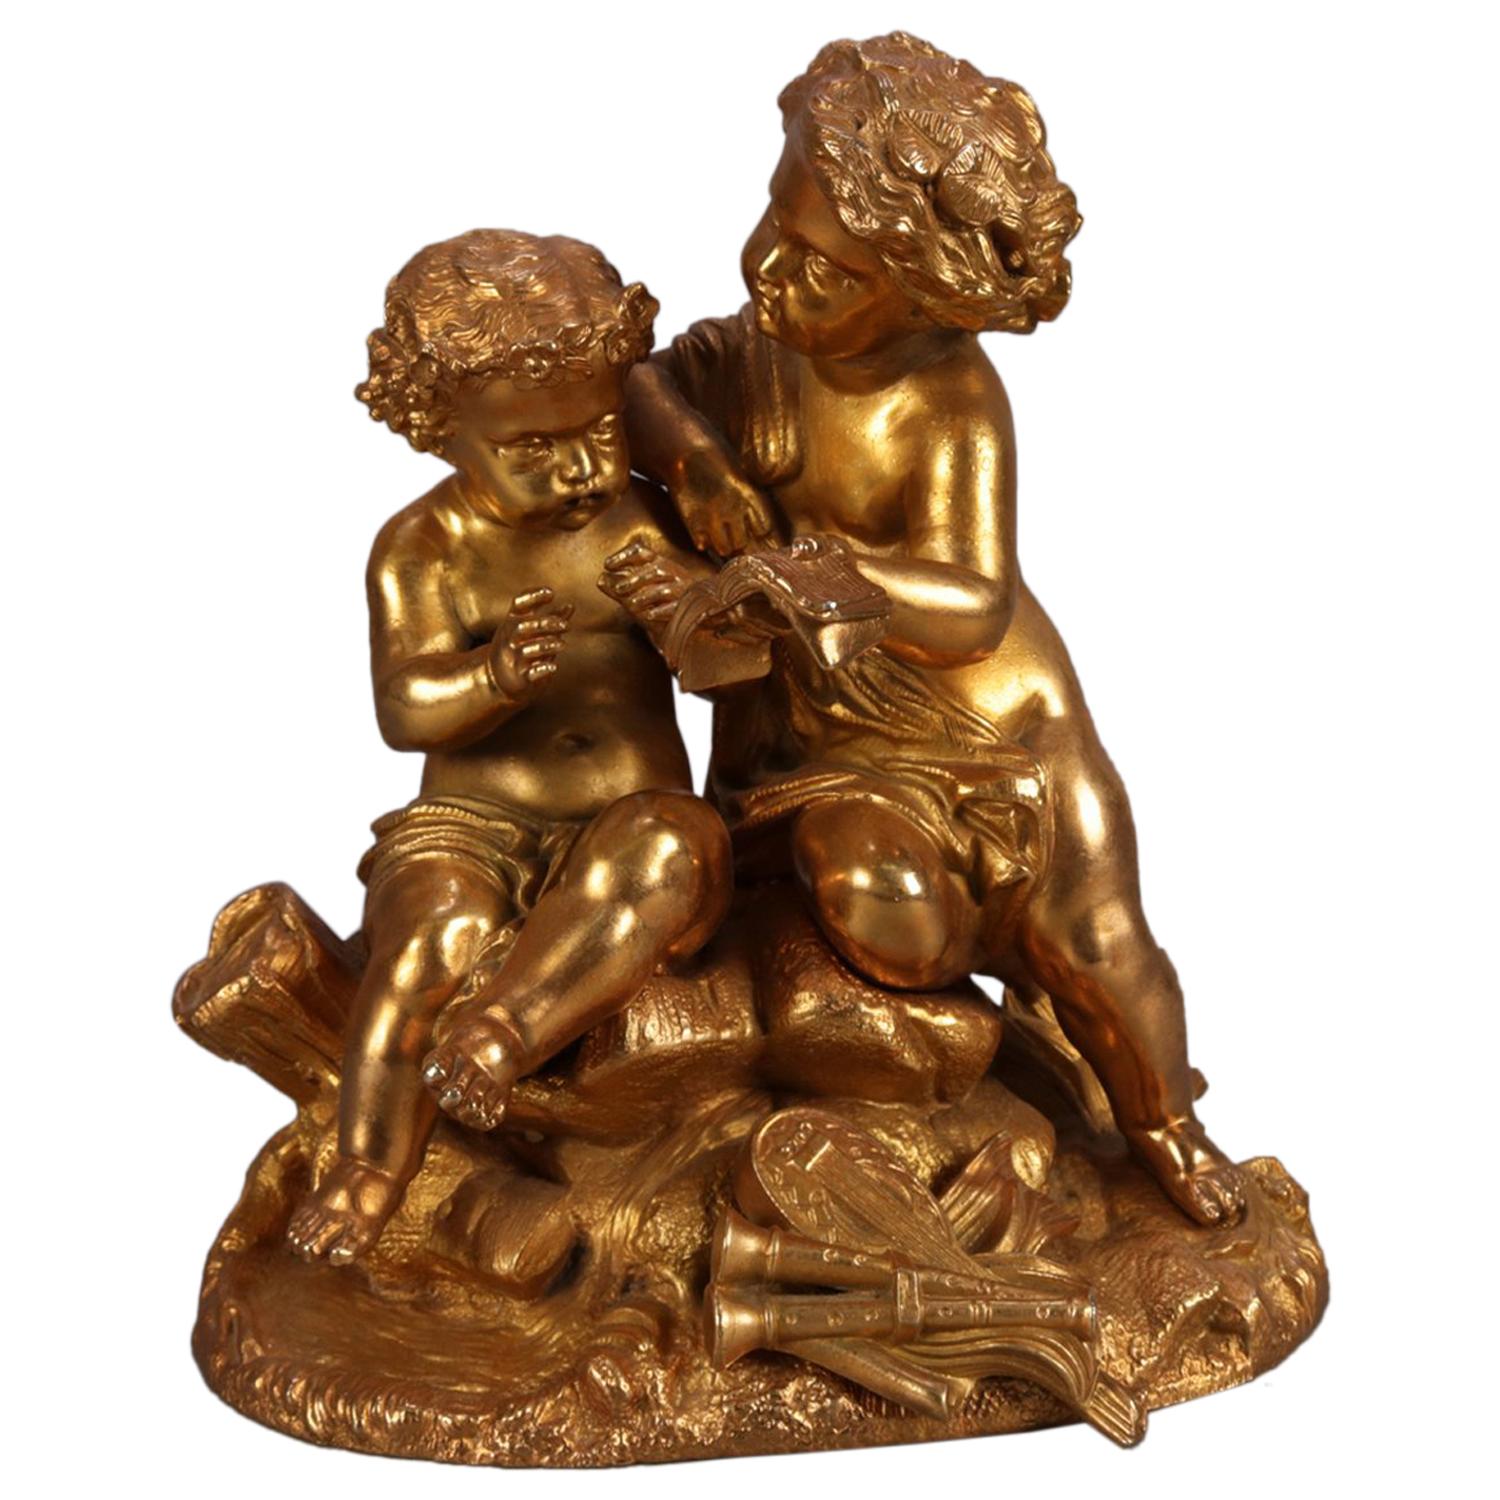 Antique French Classical Gilt Metal Figural Sculpture by PH Mourey, circa 1890